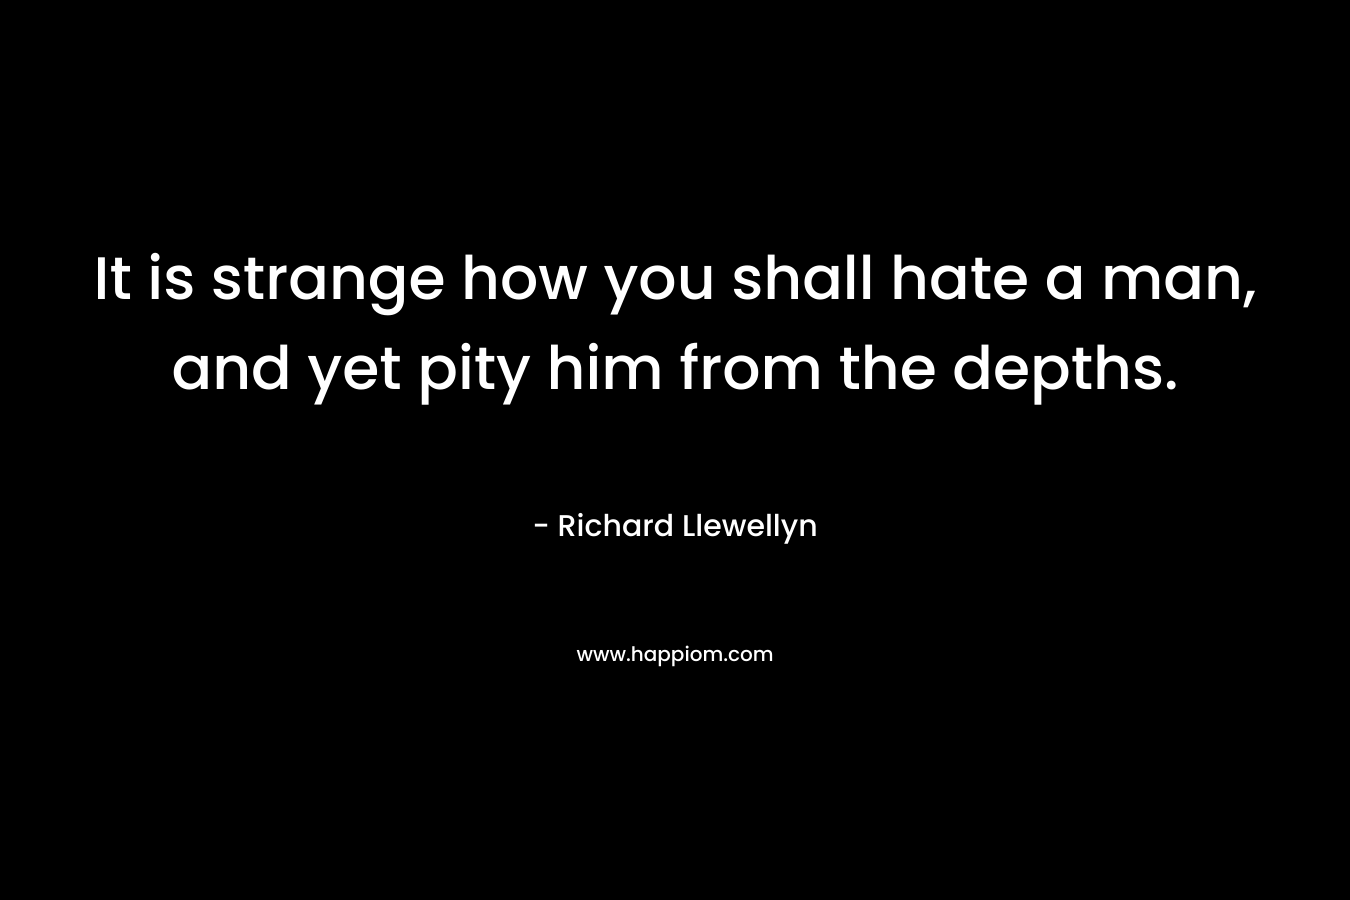 It is strange how you shall hate a man, and yet pity him from the depths.